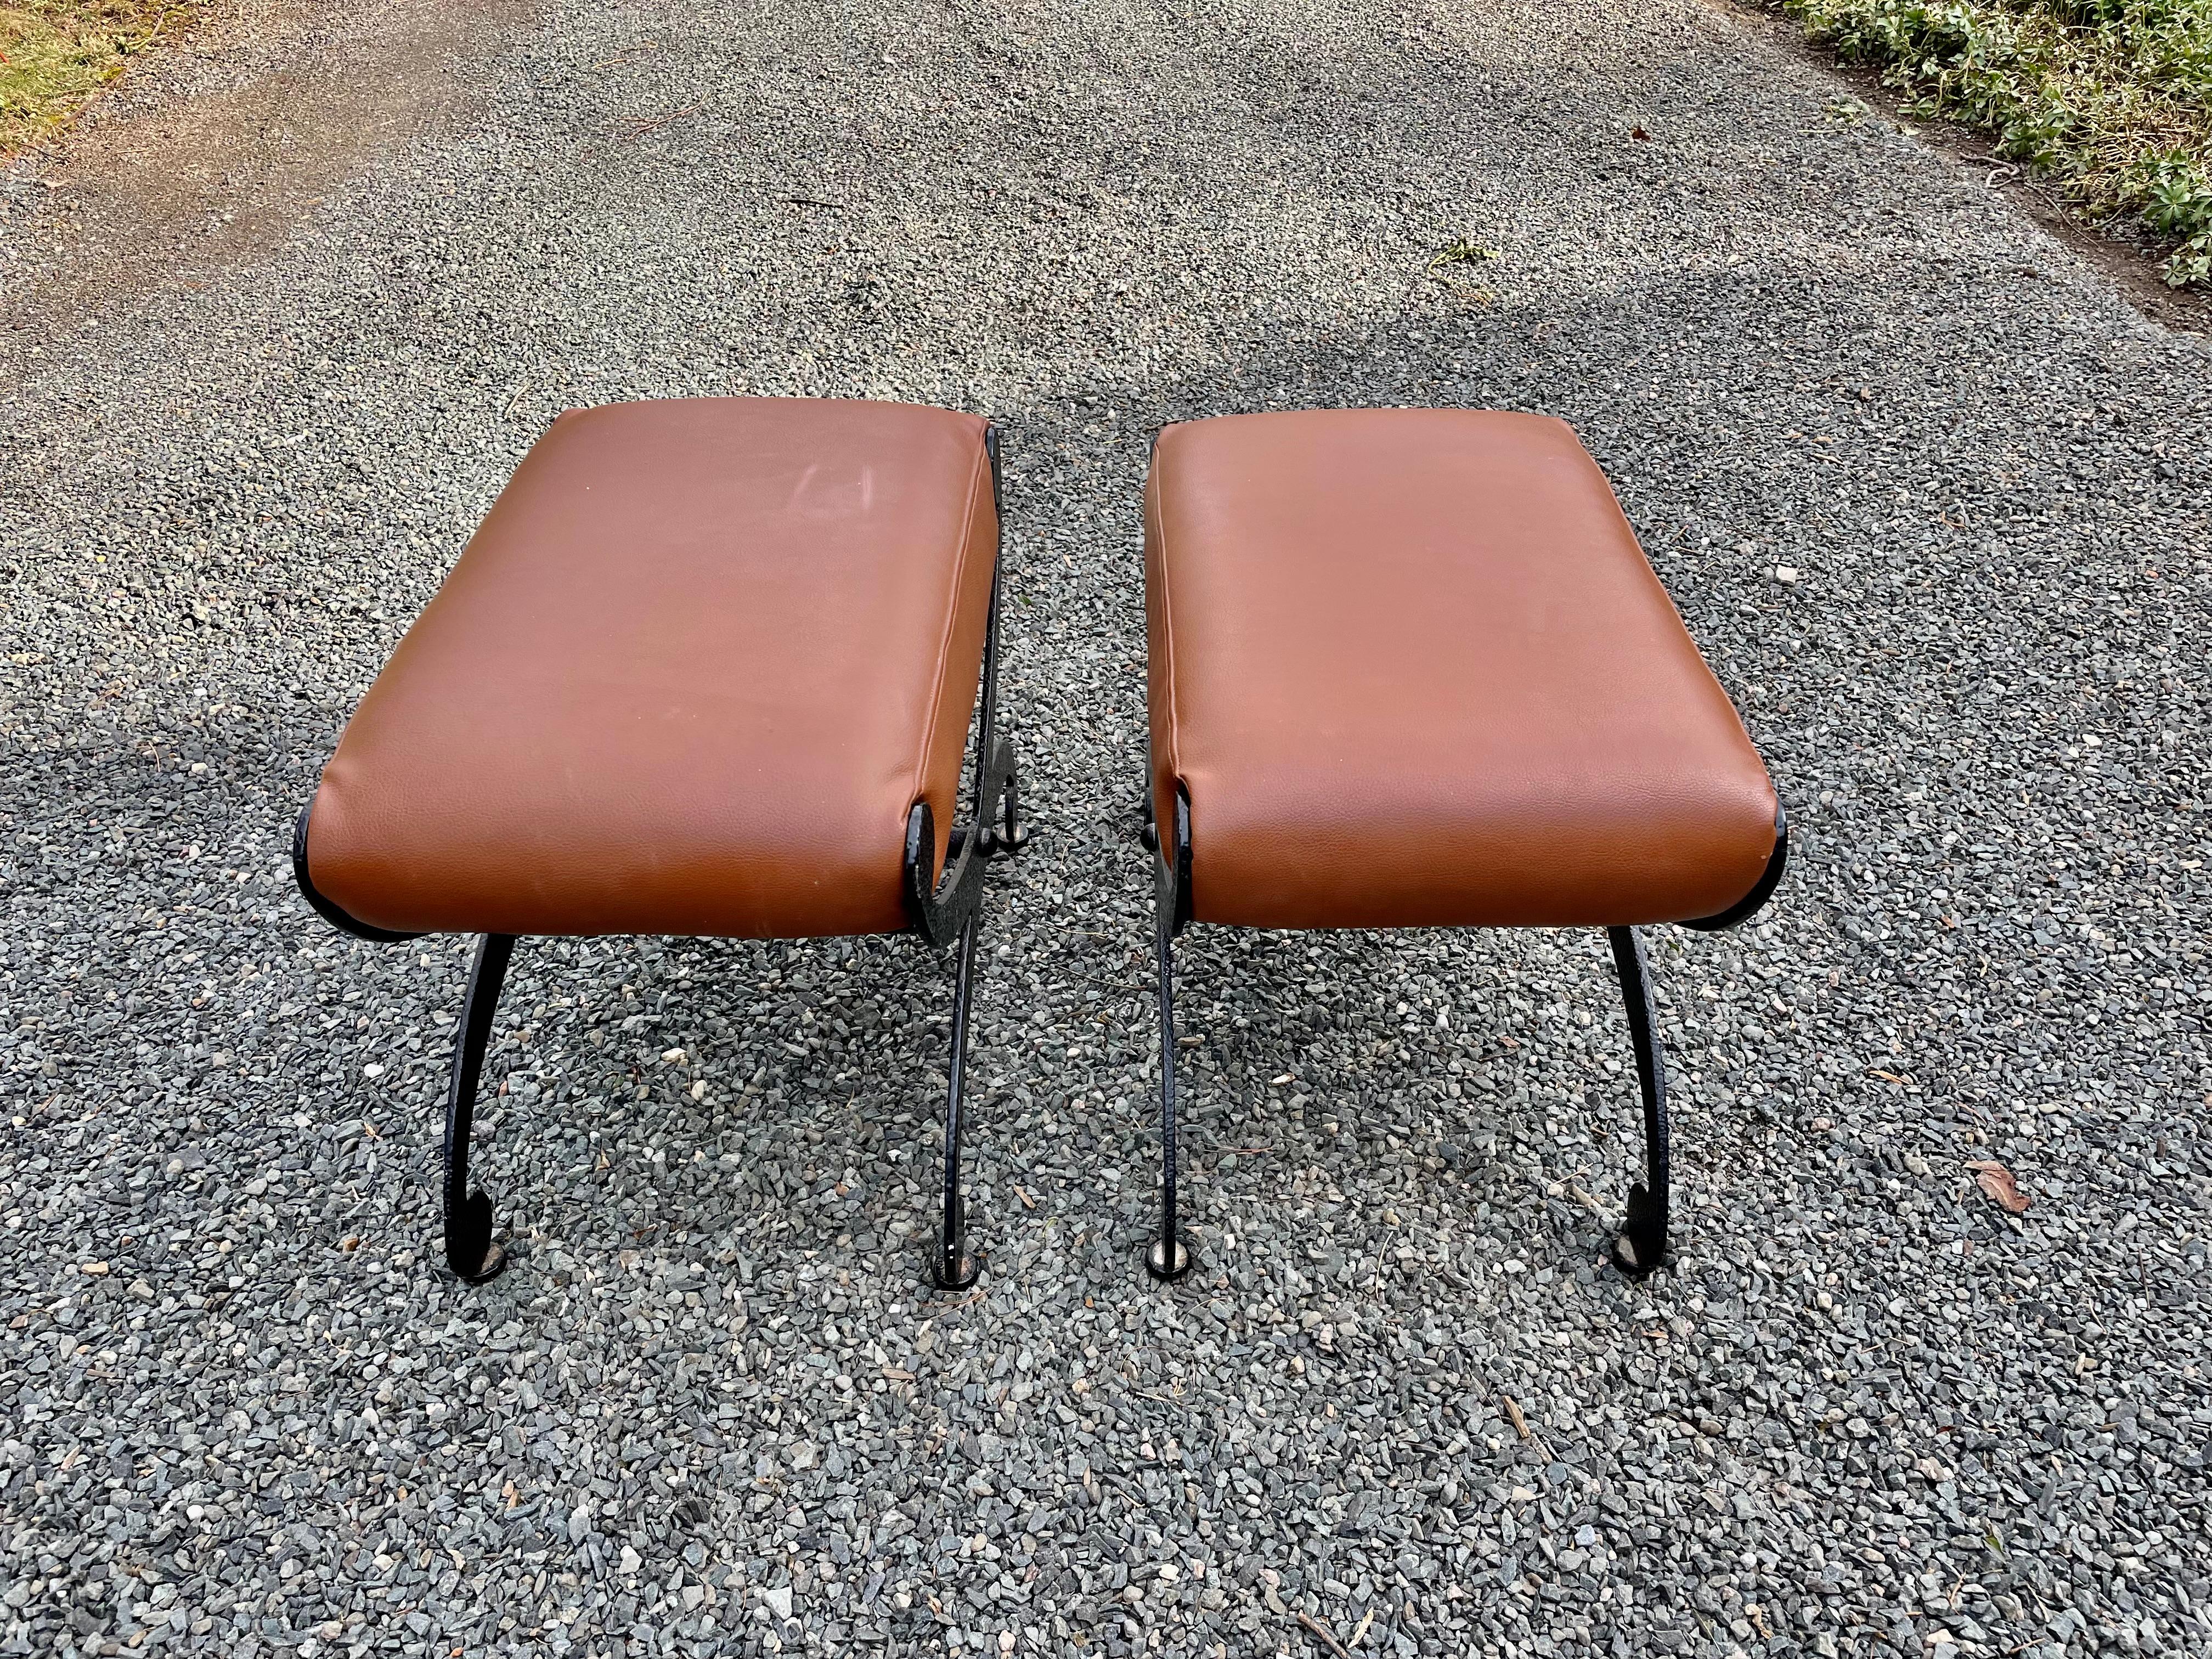 American Handsome Pair of Regency Style Wrought Iron & Leather Benches